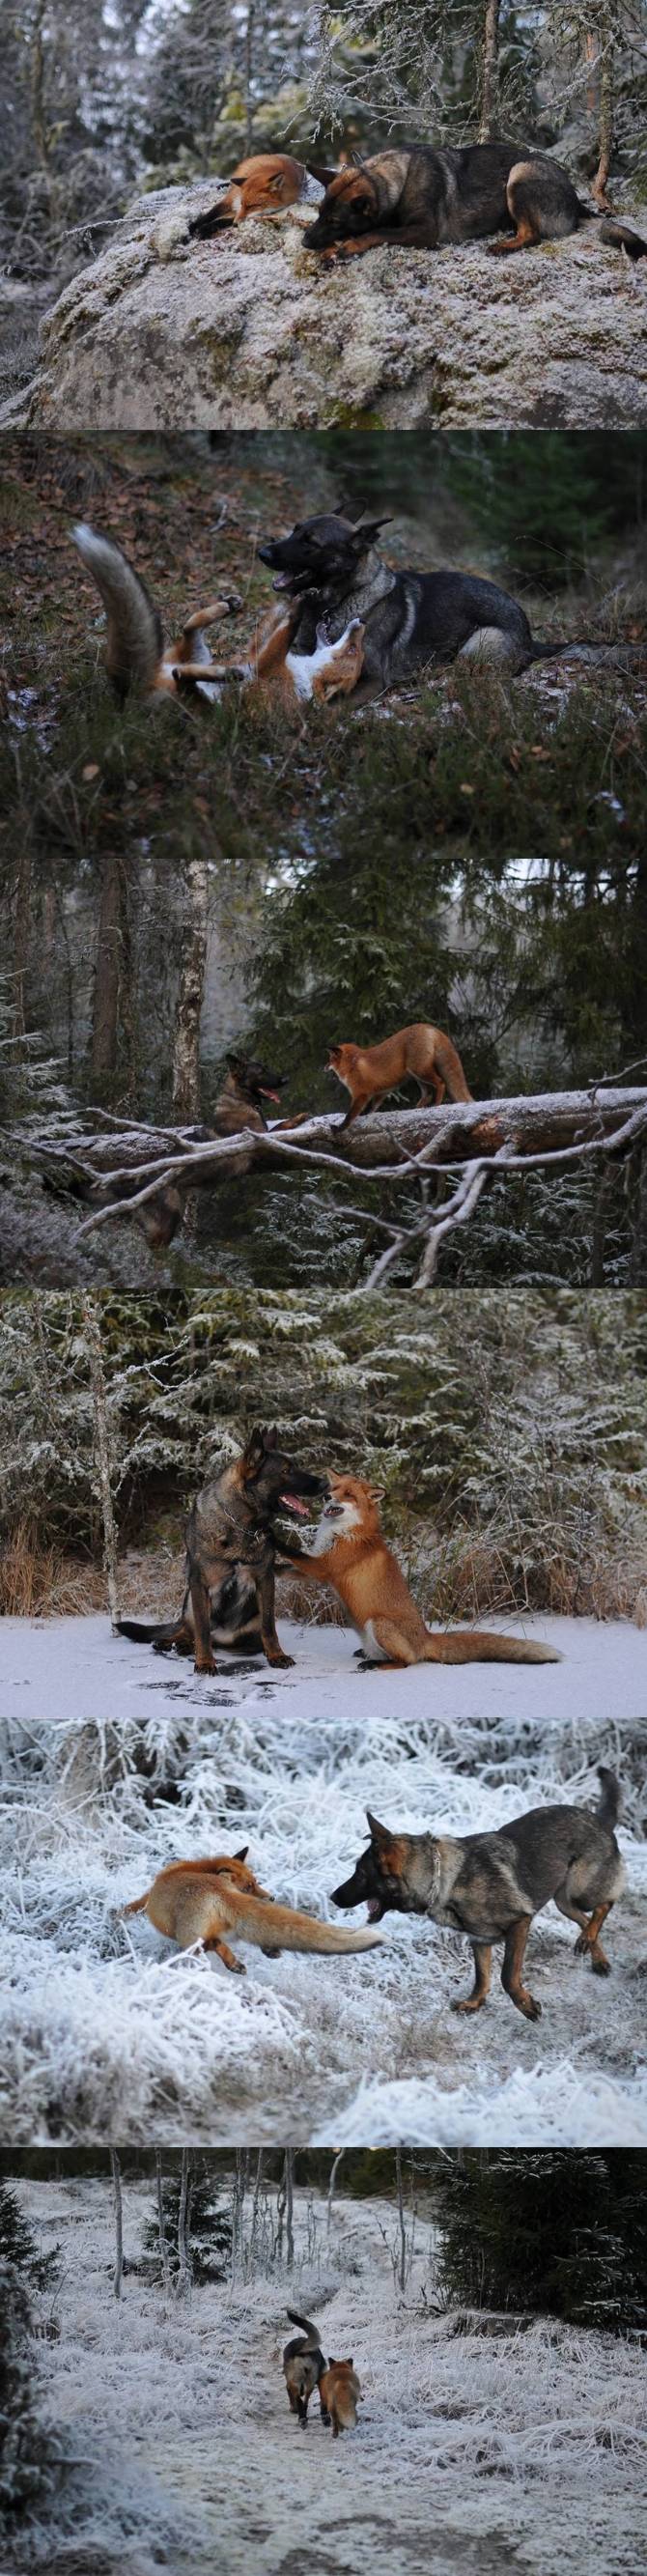 Fox and dog real friends.